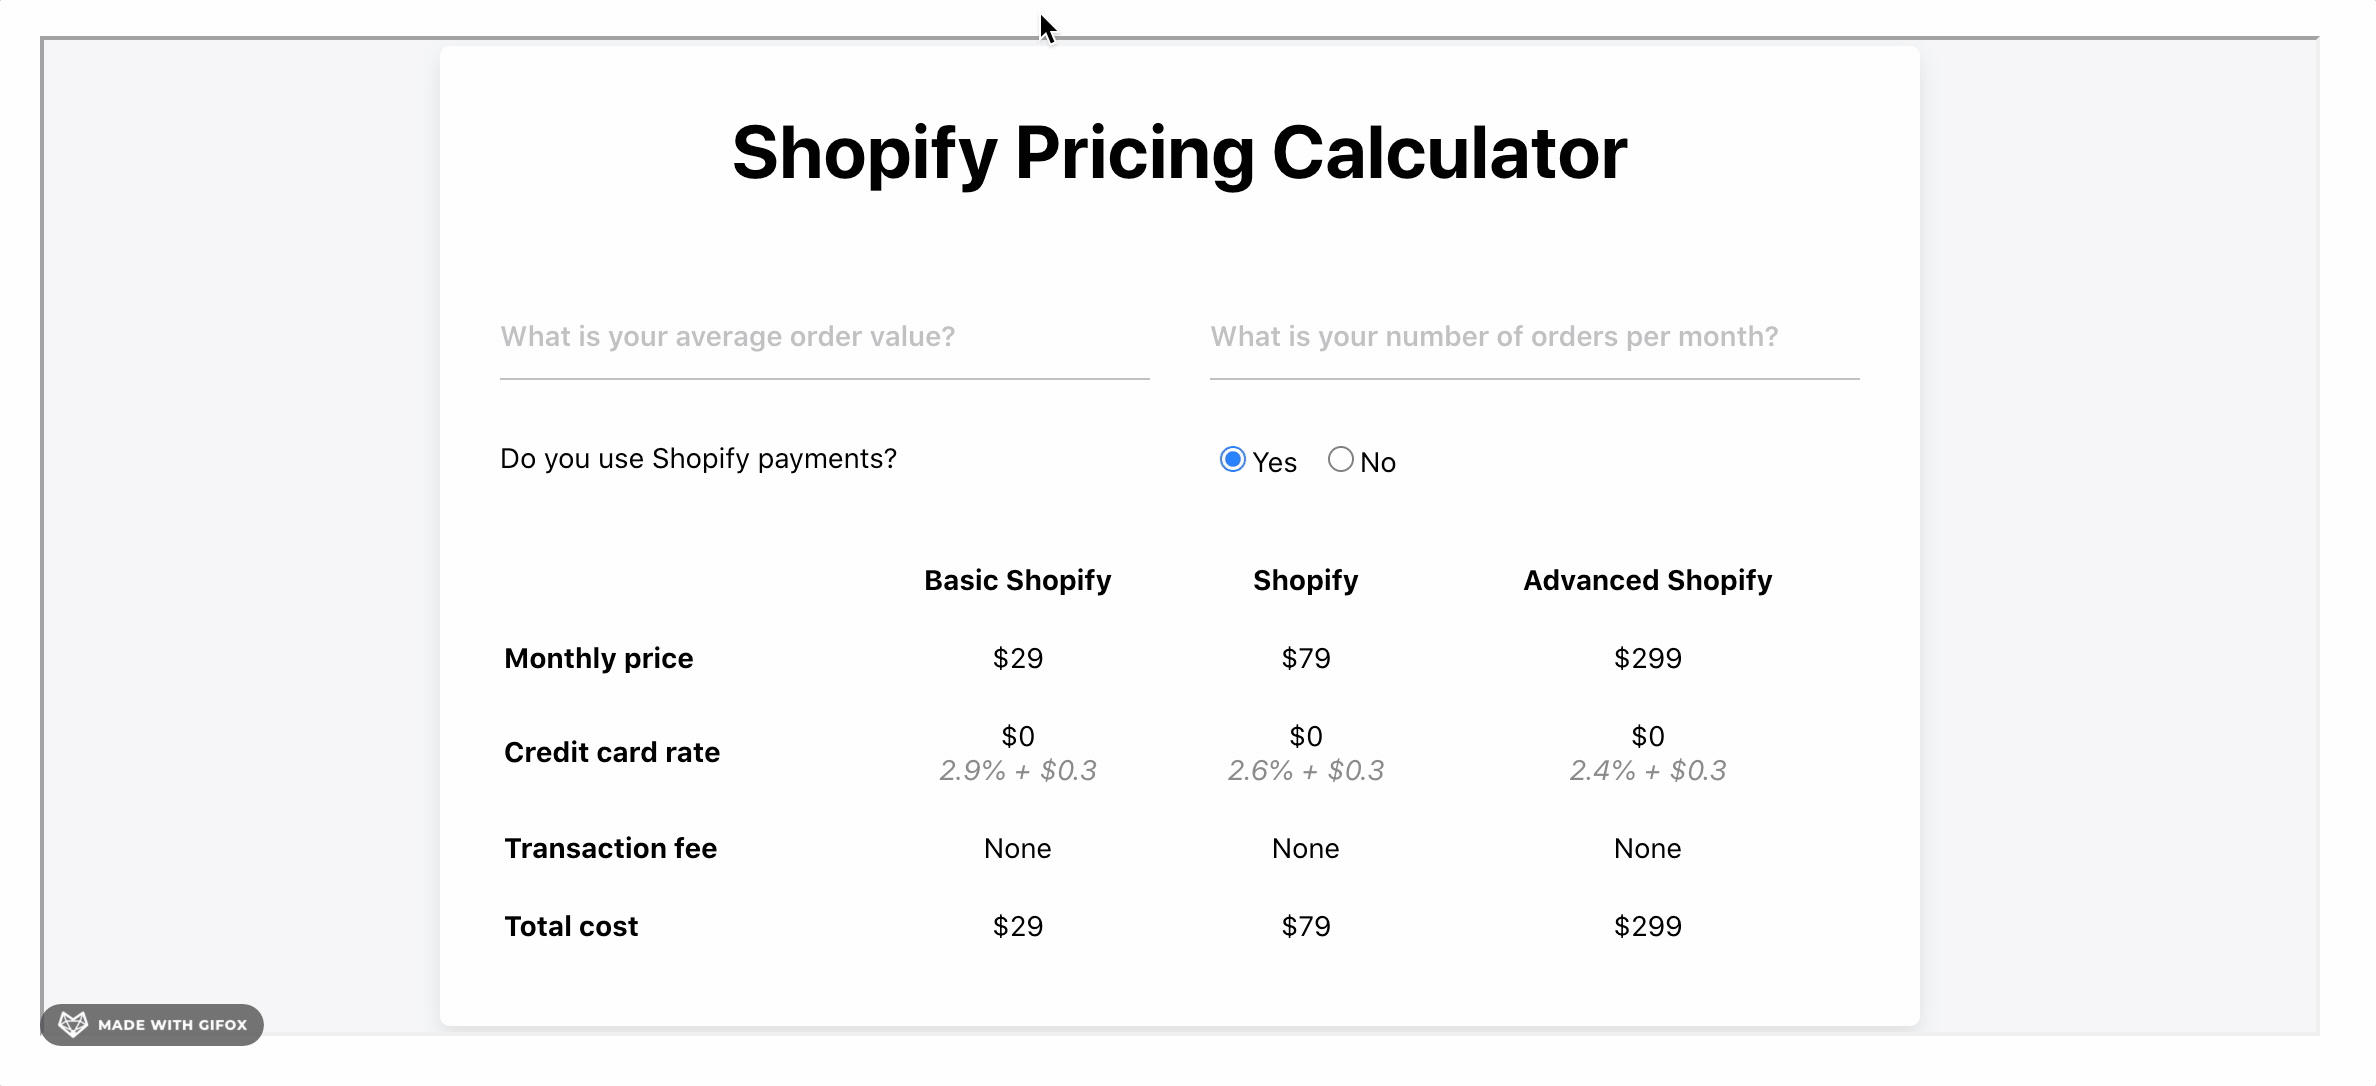 Shopify Pricing Calculator